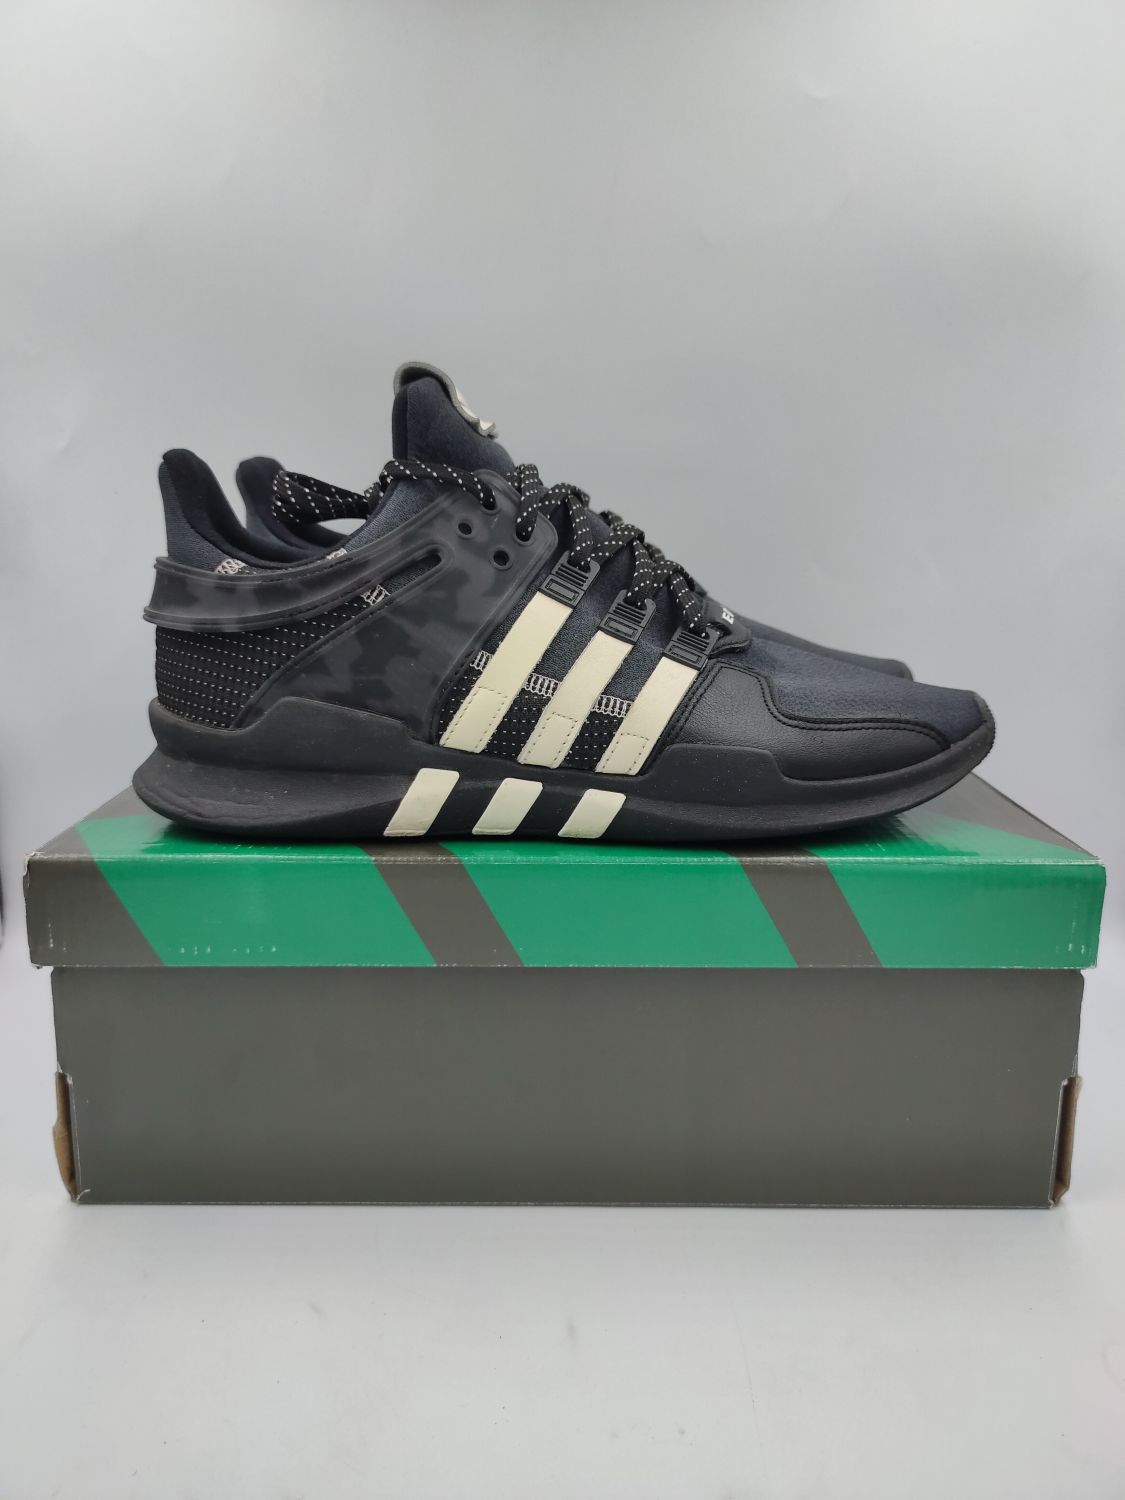 Accuracy spine Oxidize Adidas EQT Support ADV Undefeated | AfterMarket